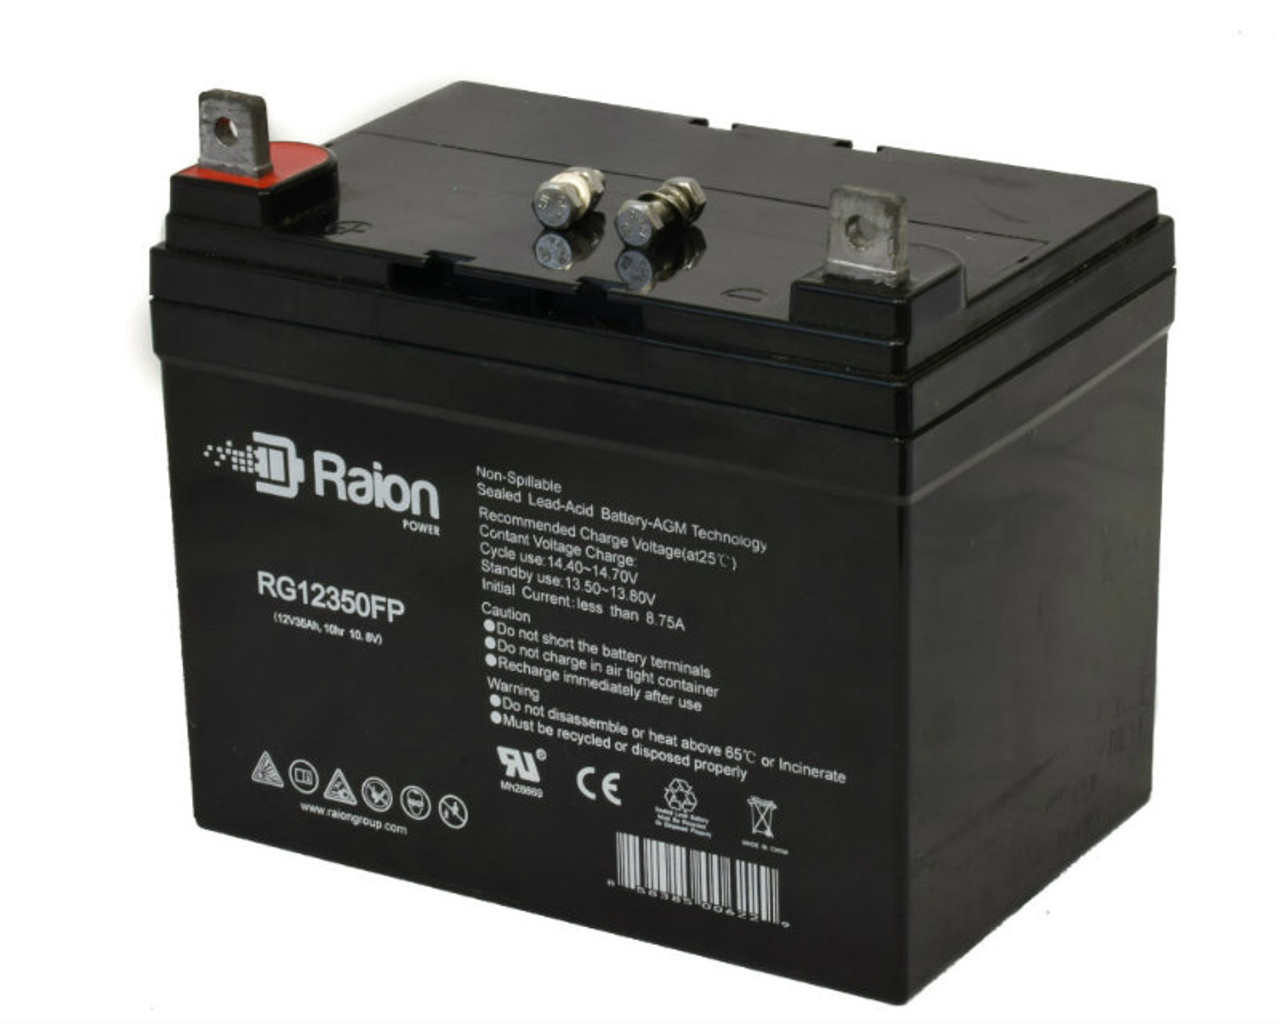 Raion Power Replacement 12V 35Ah RG12350FP Battery for Lawn-Boy 9329ES (After 1975)